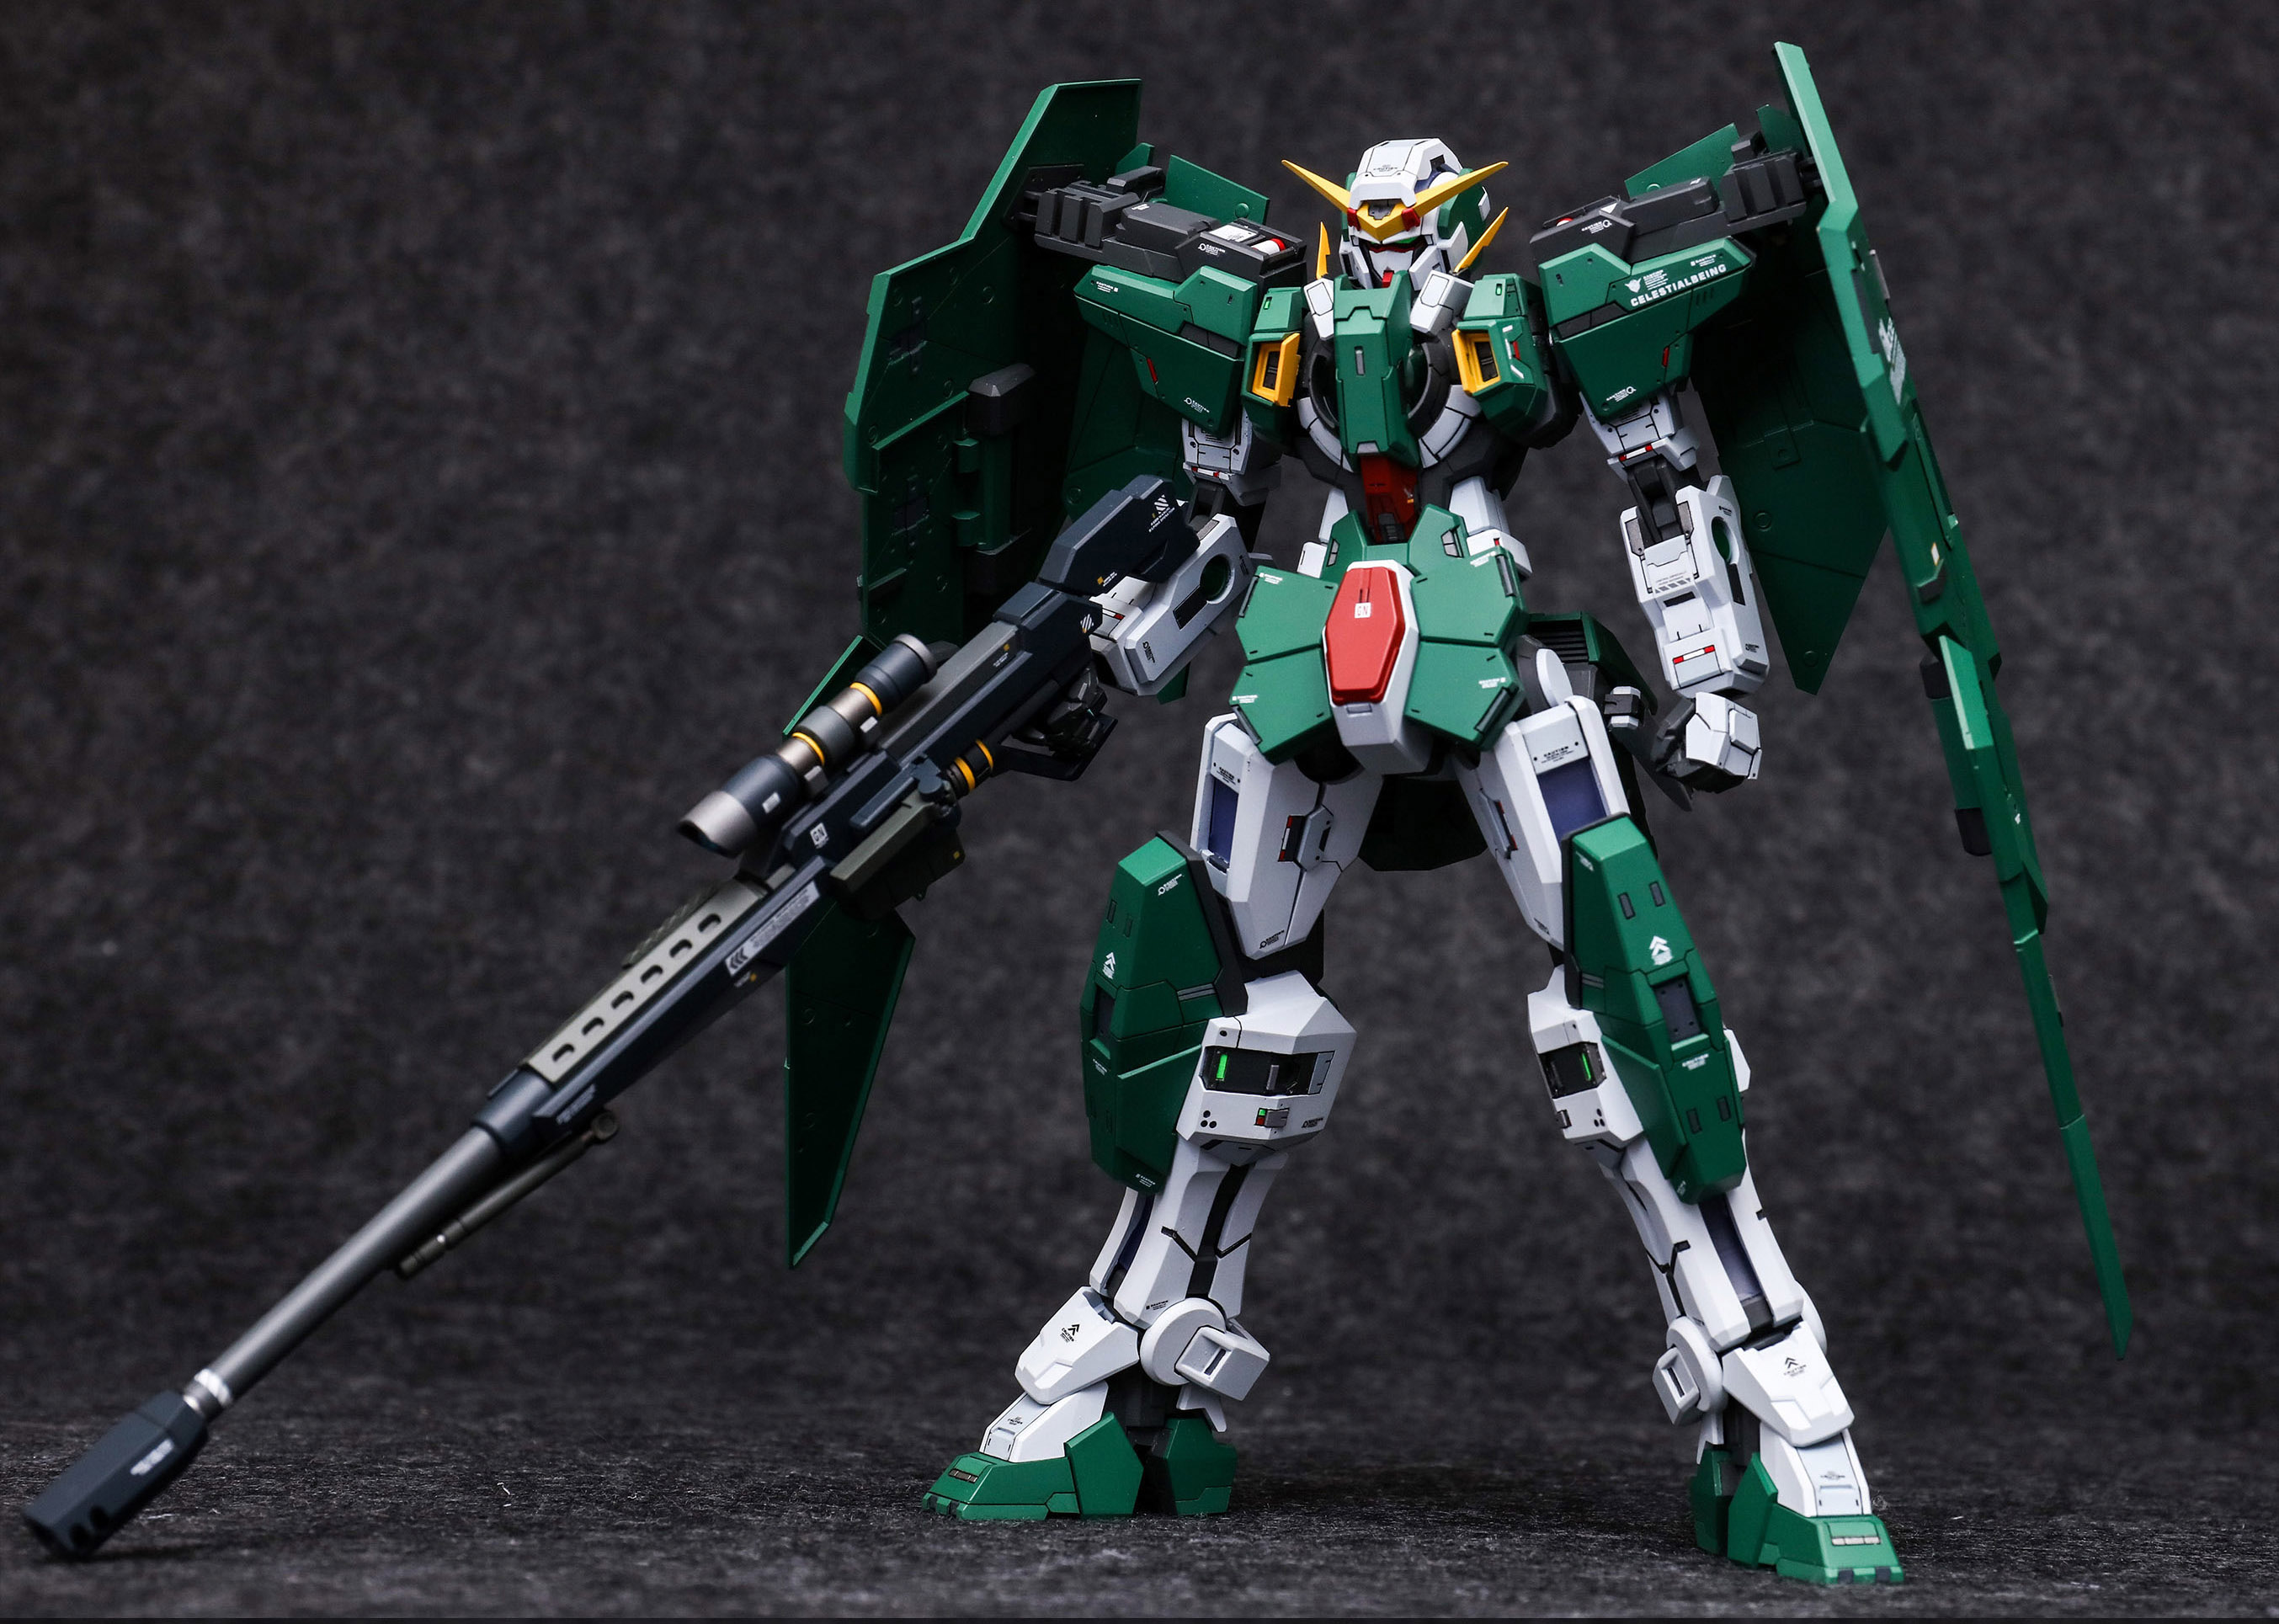 Bandai MG 1:100 Scale Gundam Dynames Action Figure for sale online 